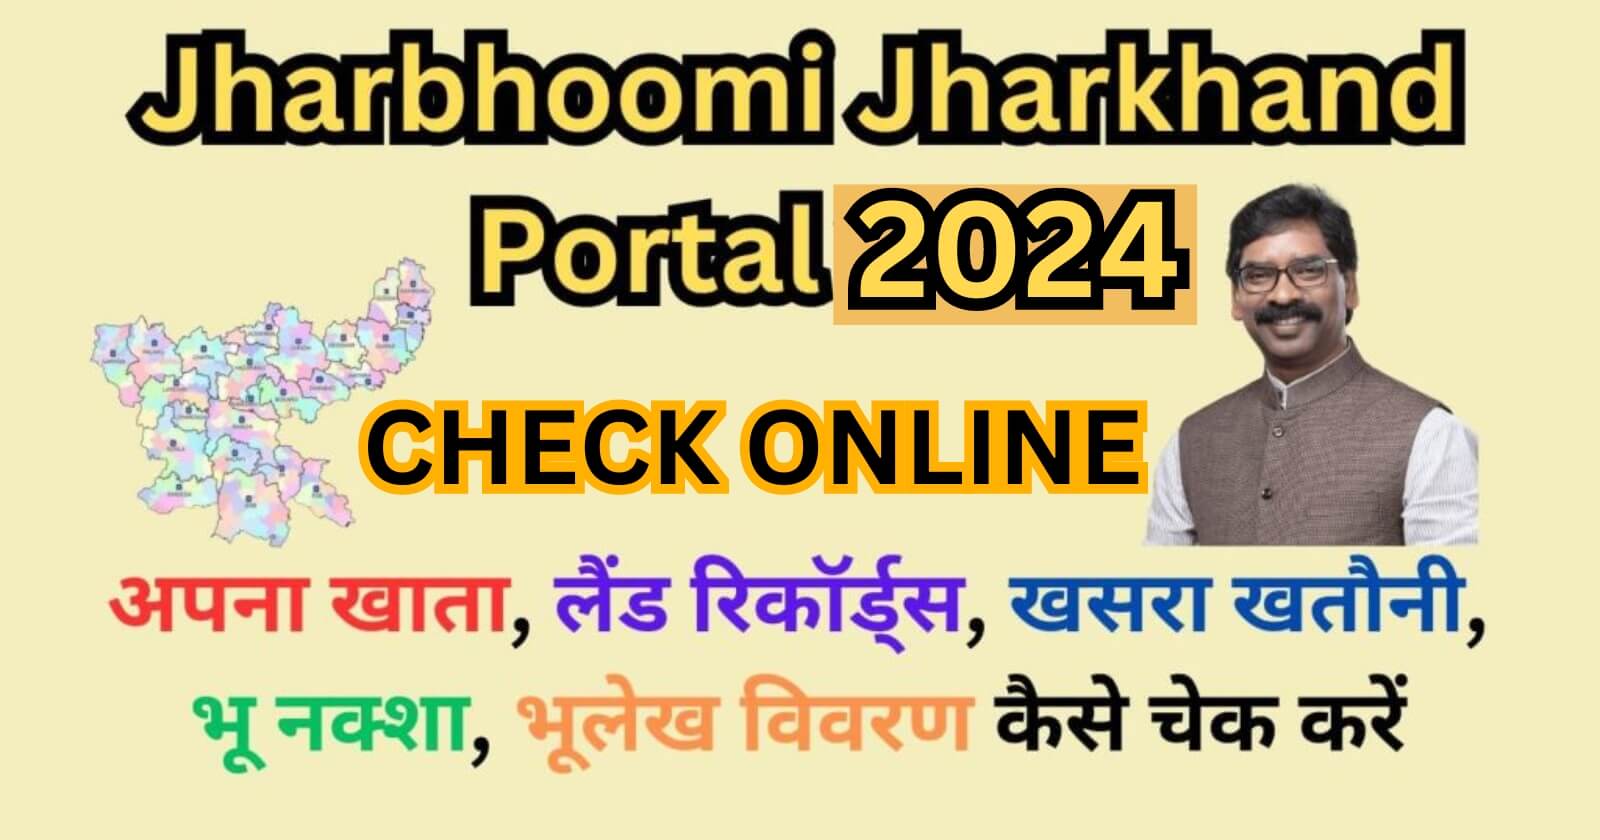 Jharbhoomi Jharkhand Land Records Check Online